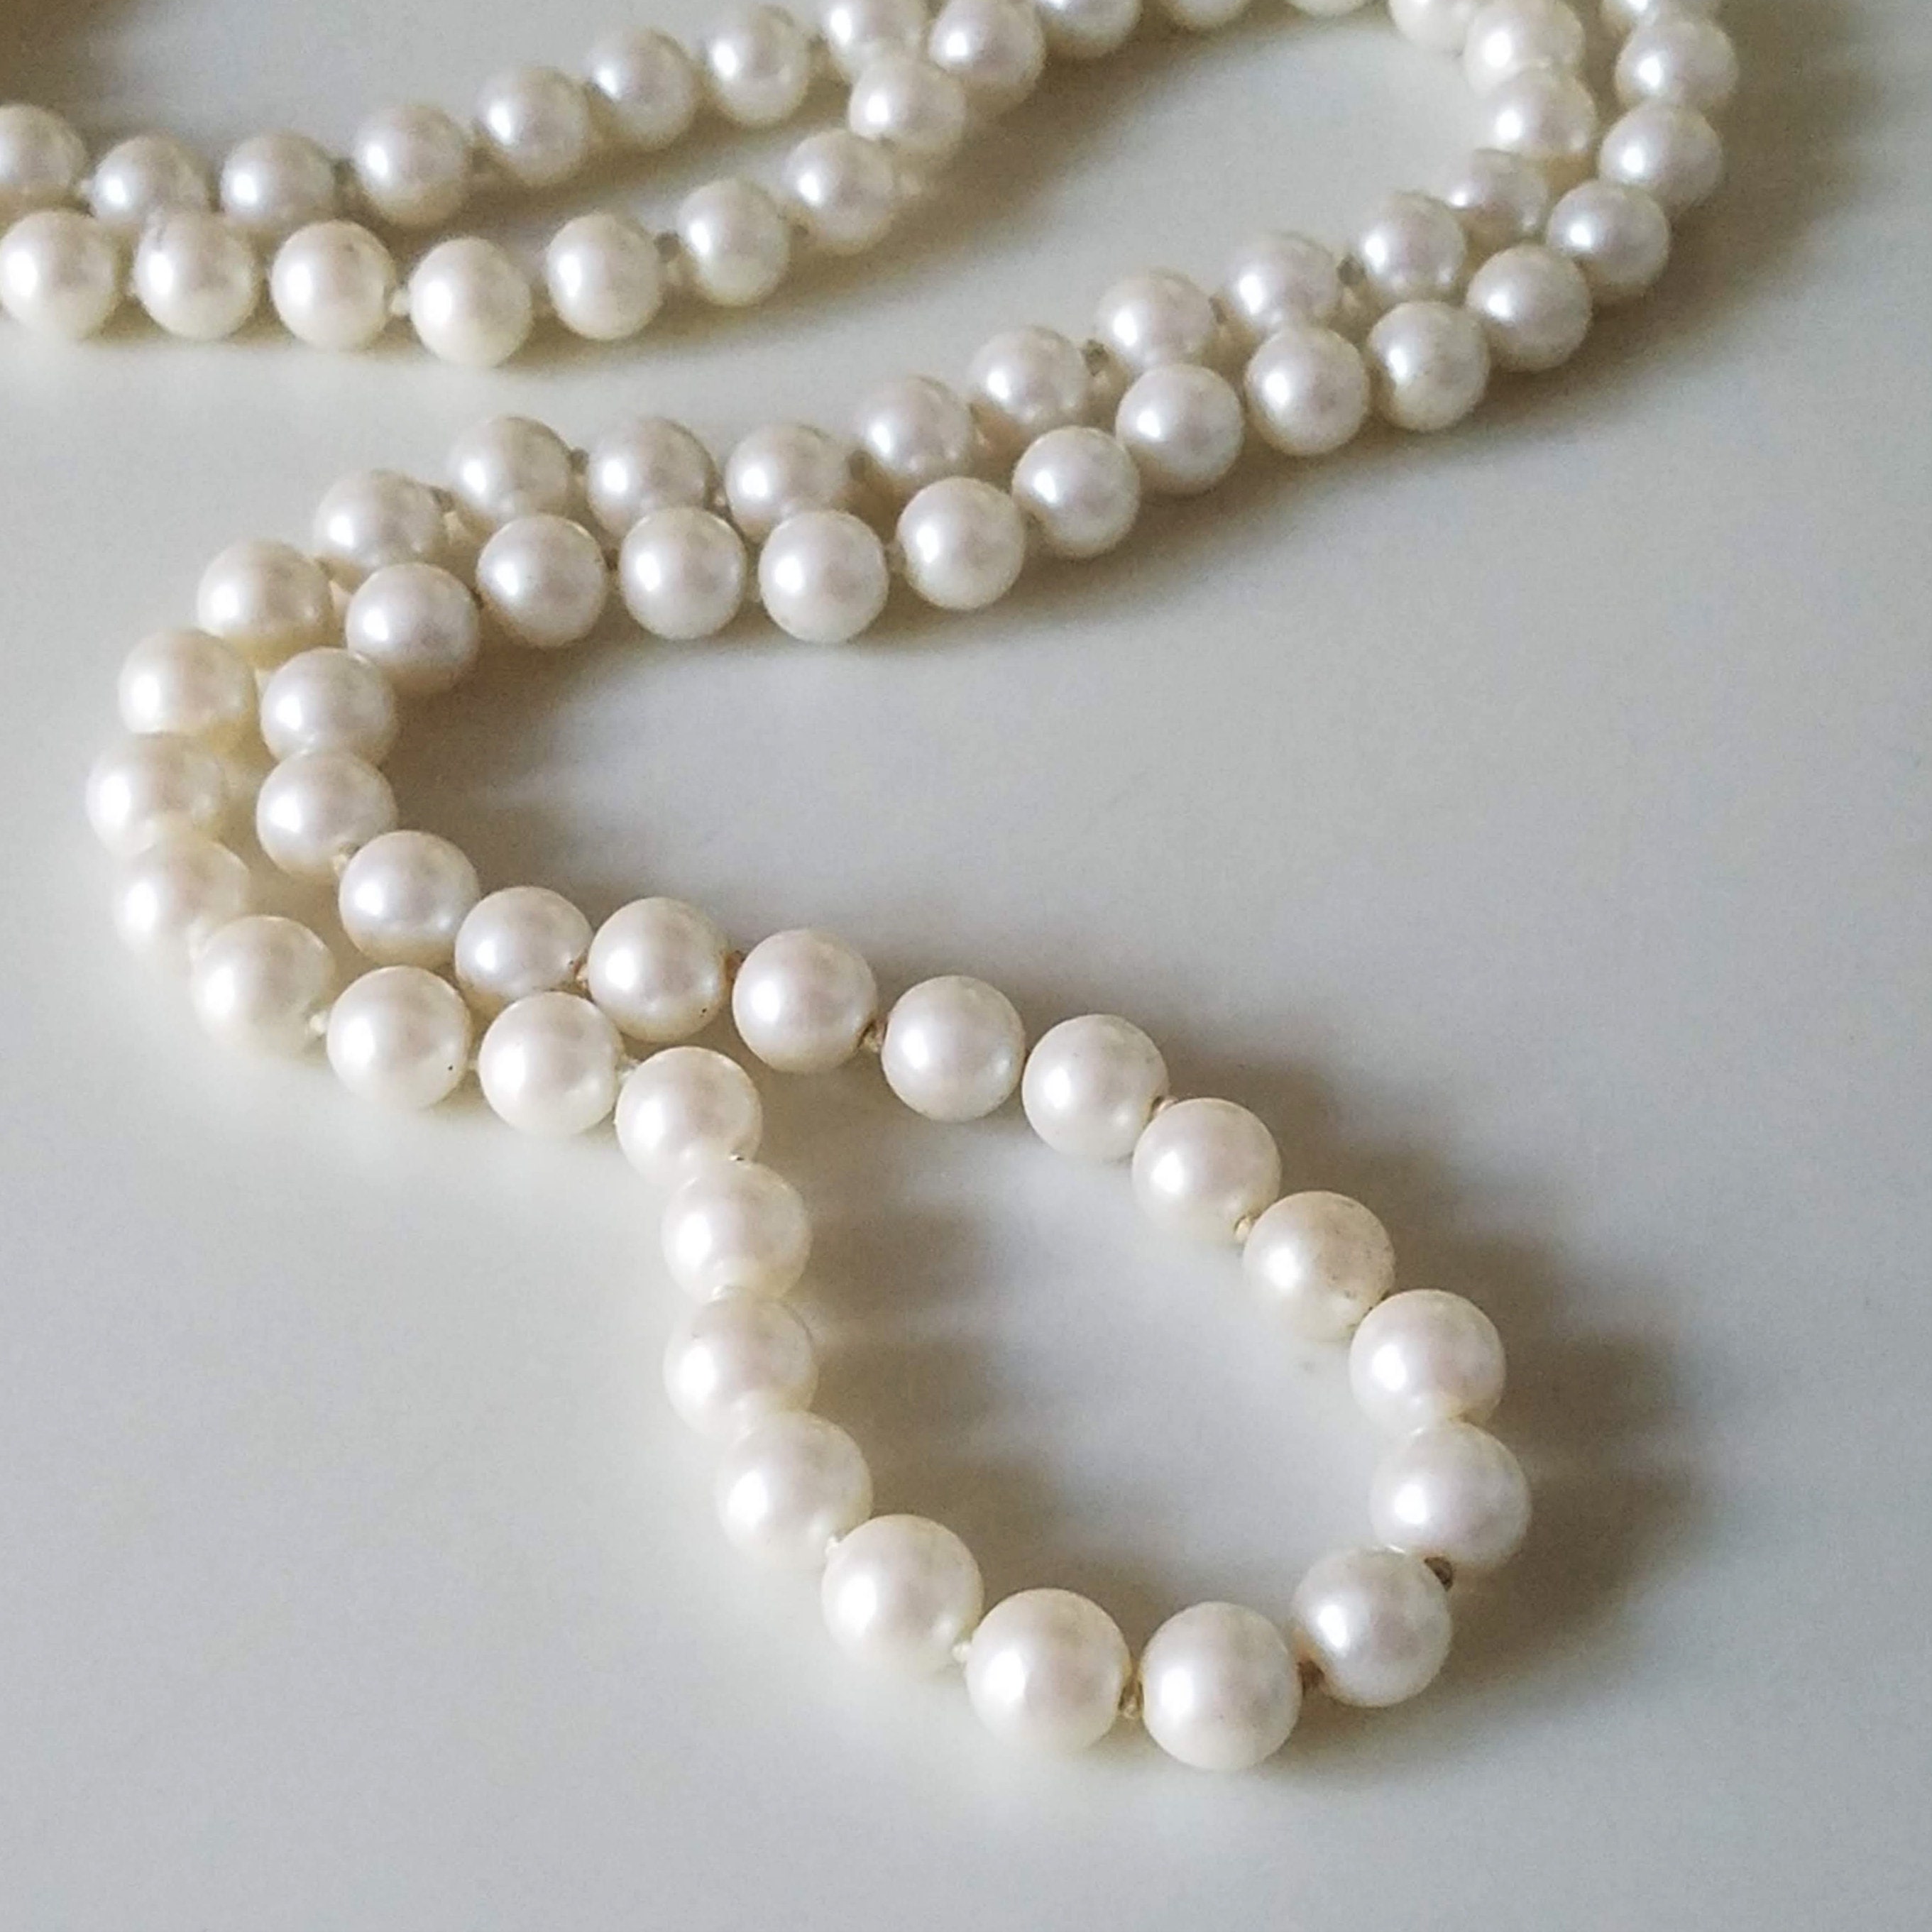 Long Ivory White Pearl Necklace Vintage Boho Pearl Necklace Romantic